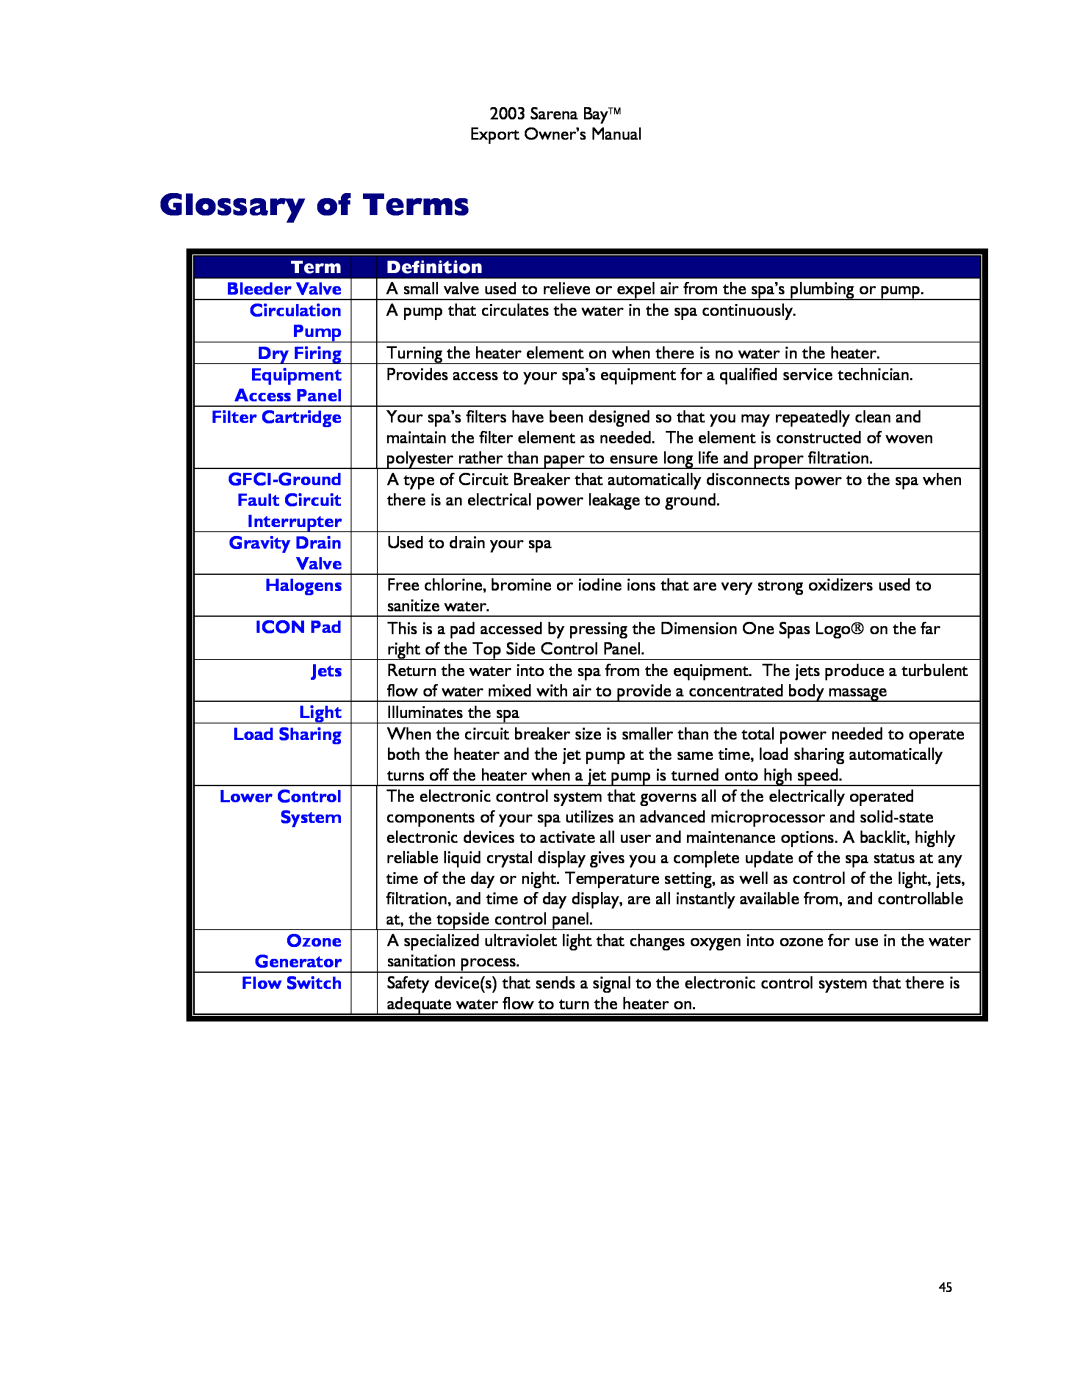 Dimension One Spas Sarena Bay manual Glossary of Terms, Definition 